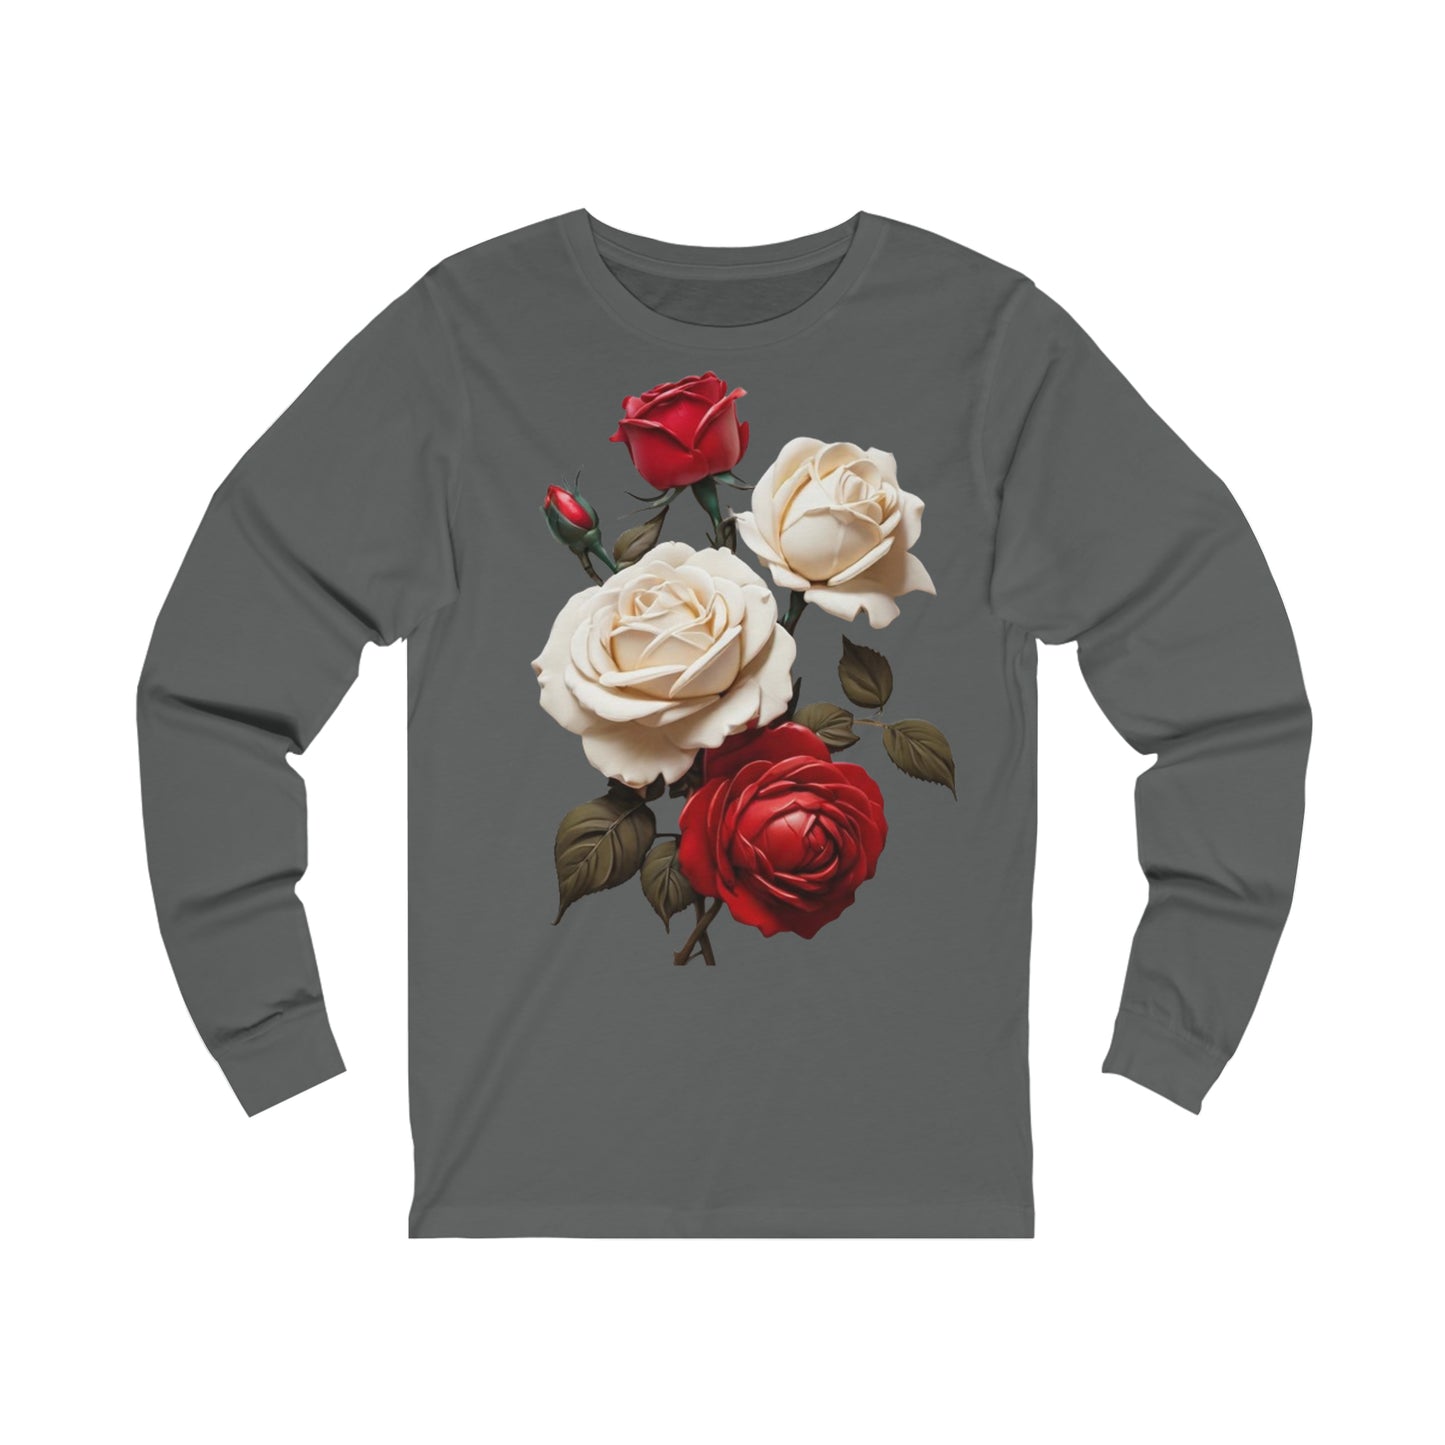 Red and White Roses - Unisex Long Sleeve T-Shirt